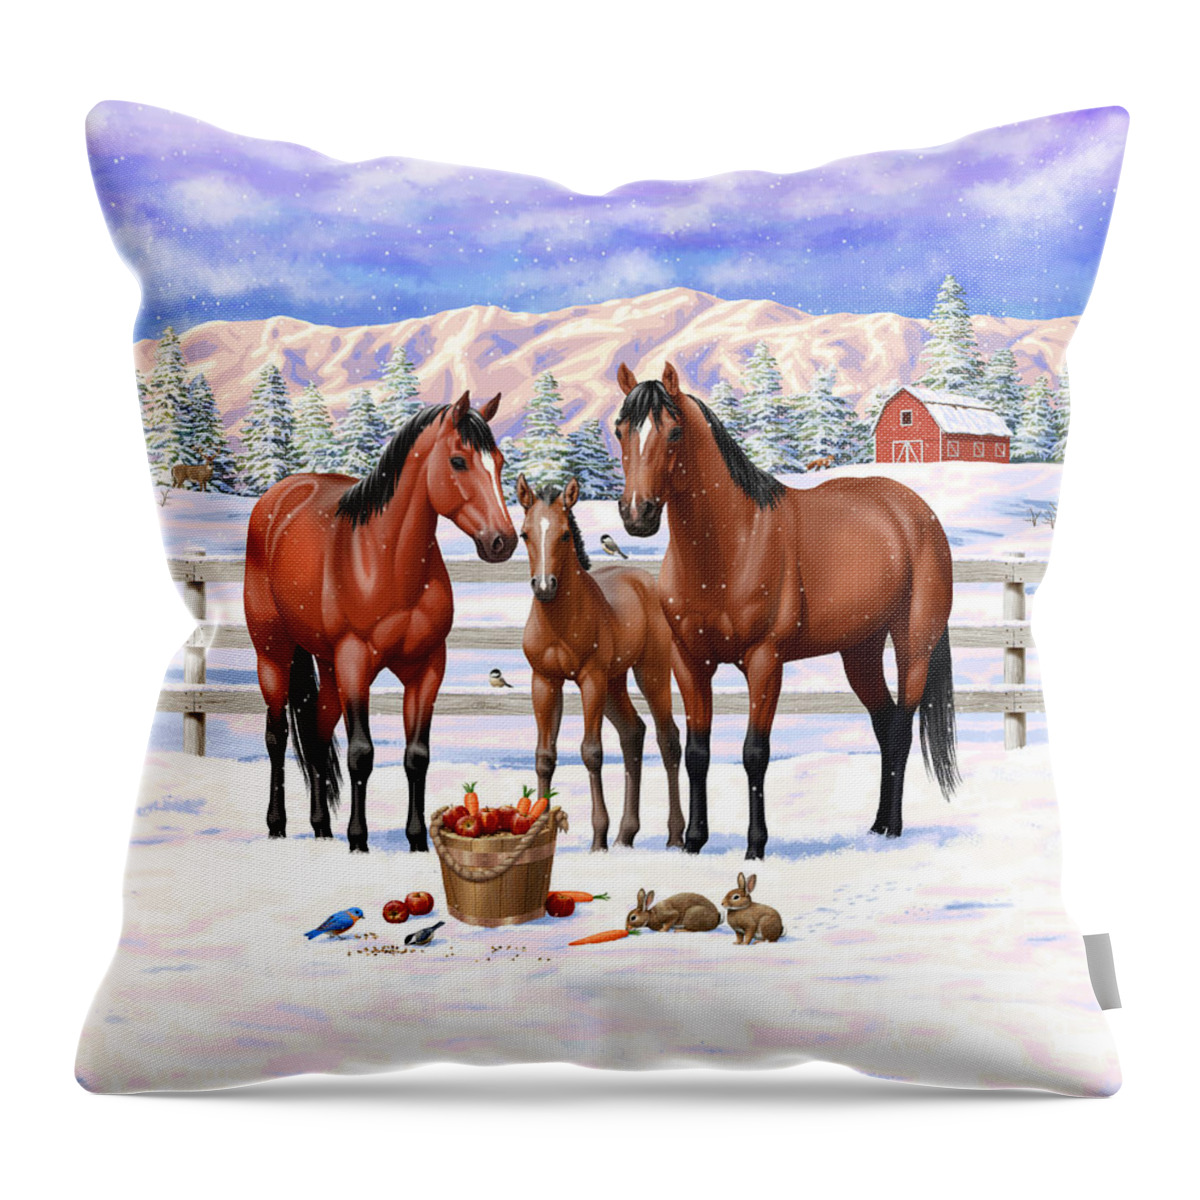 Horses Throw Pillow featuring the painting Bay Quarter Horses In Snow by Crista Forest